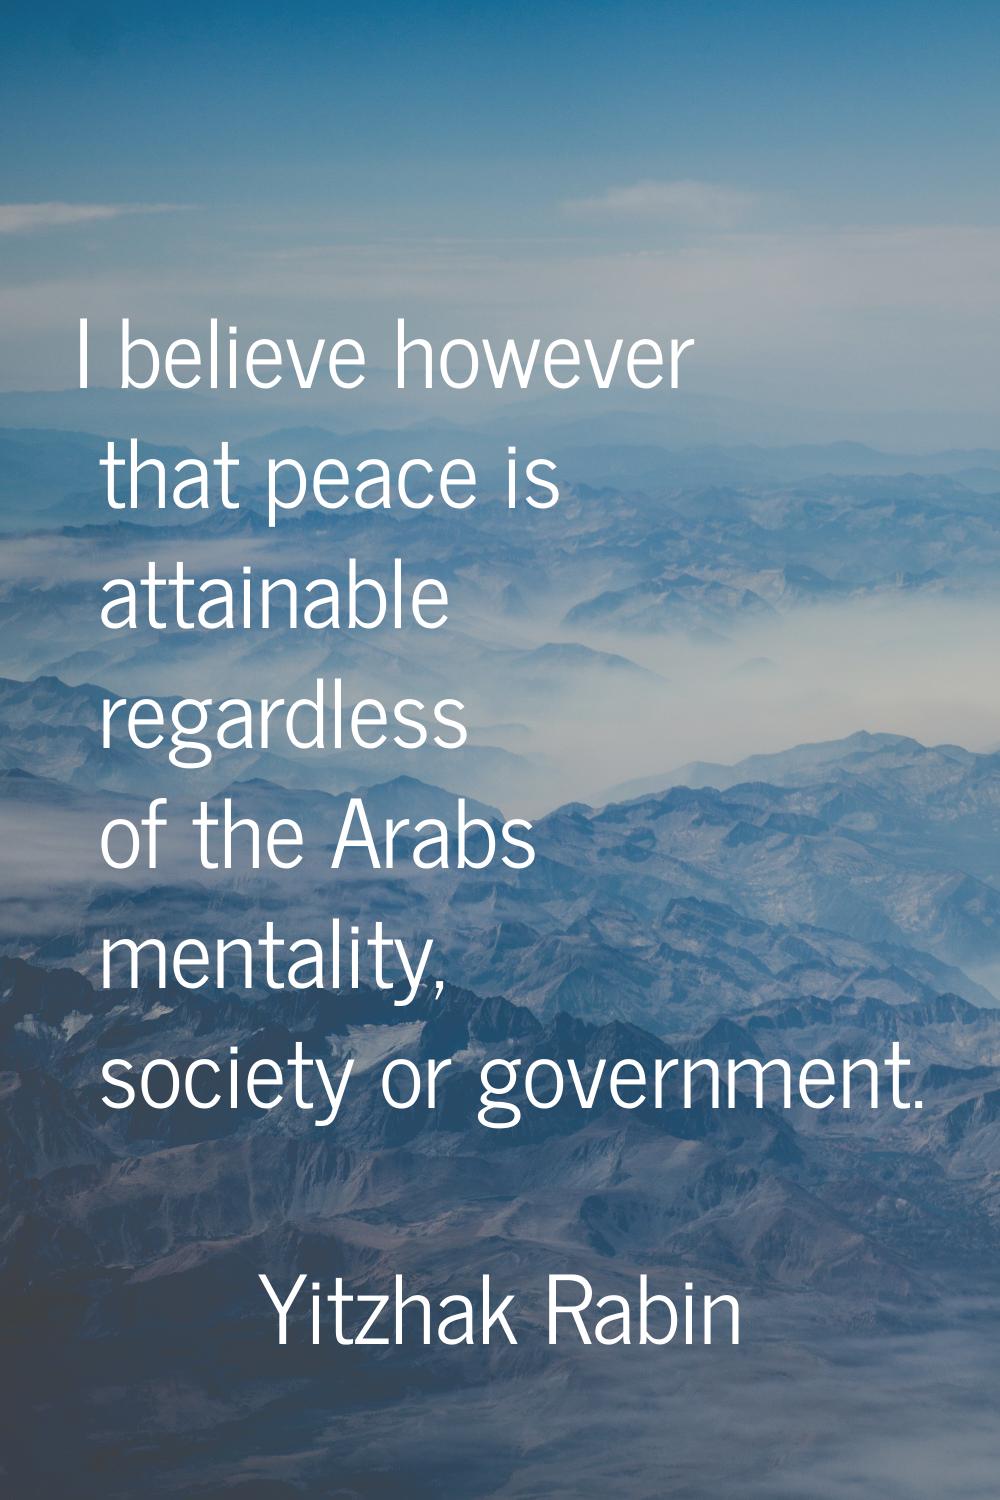 I believe however that peace is attainable regardless of the Arabs mentality, society or government